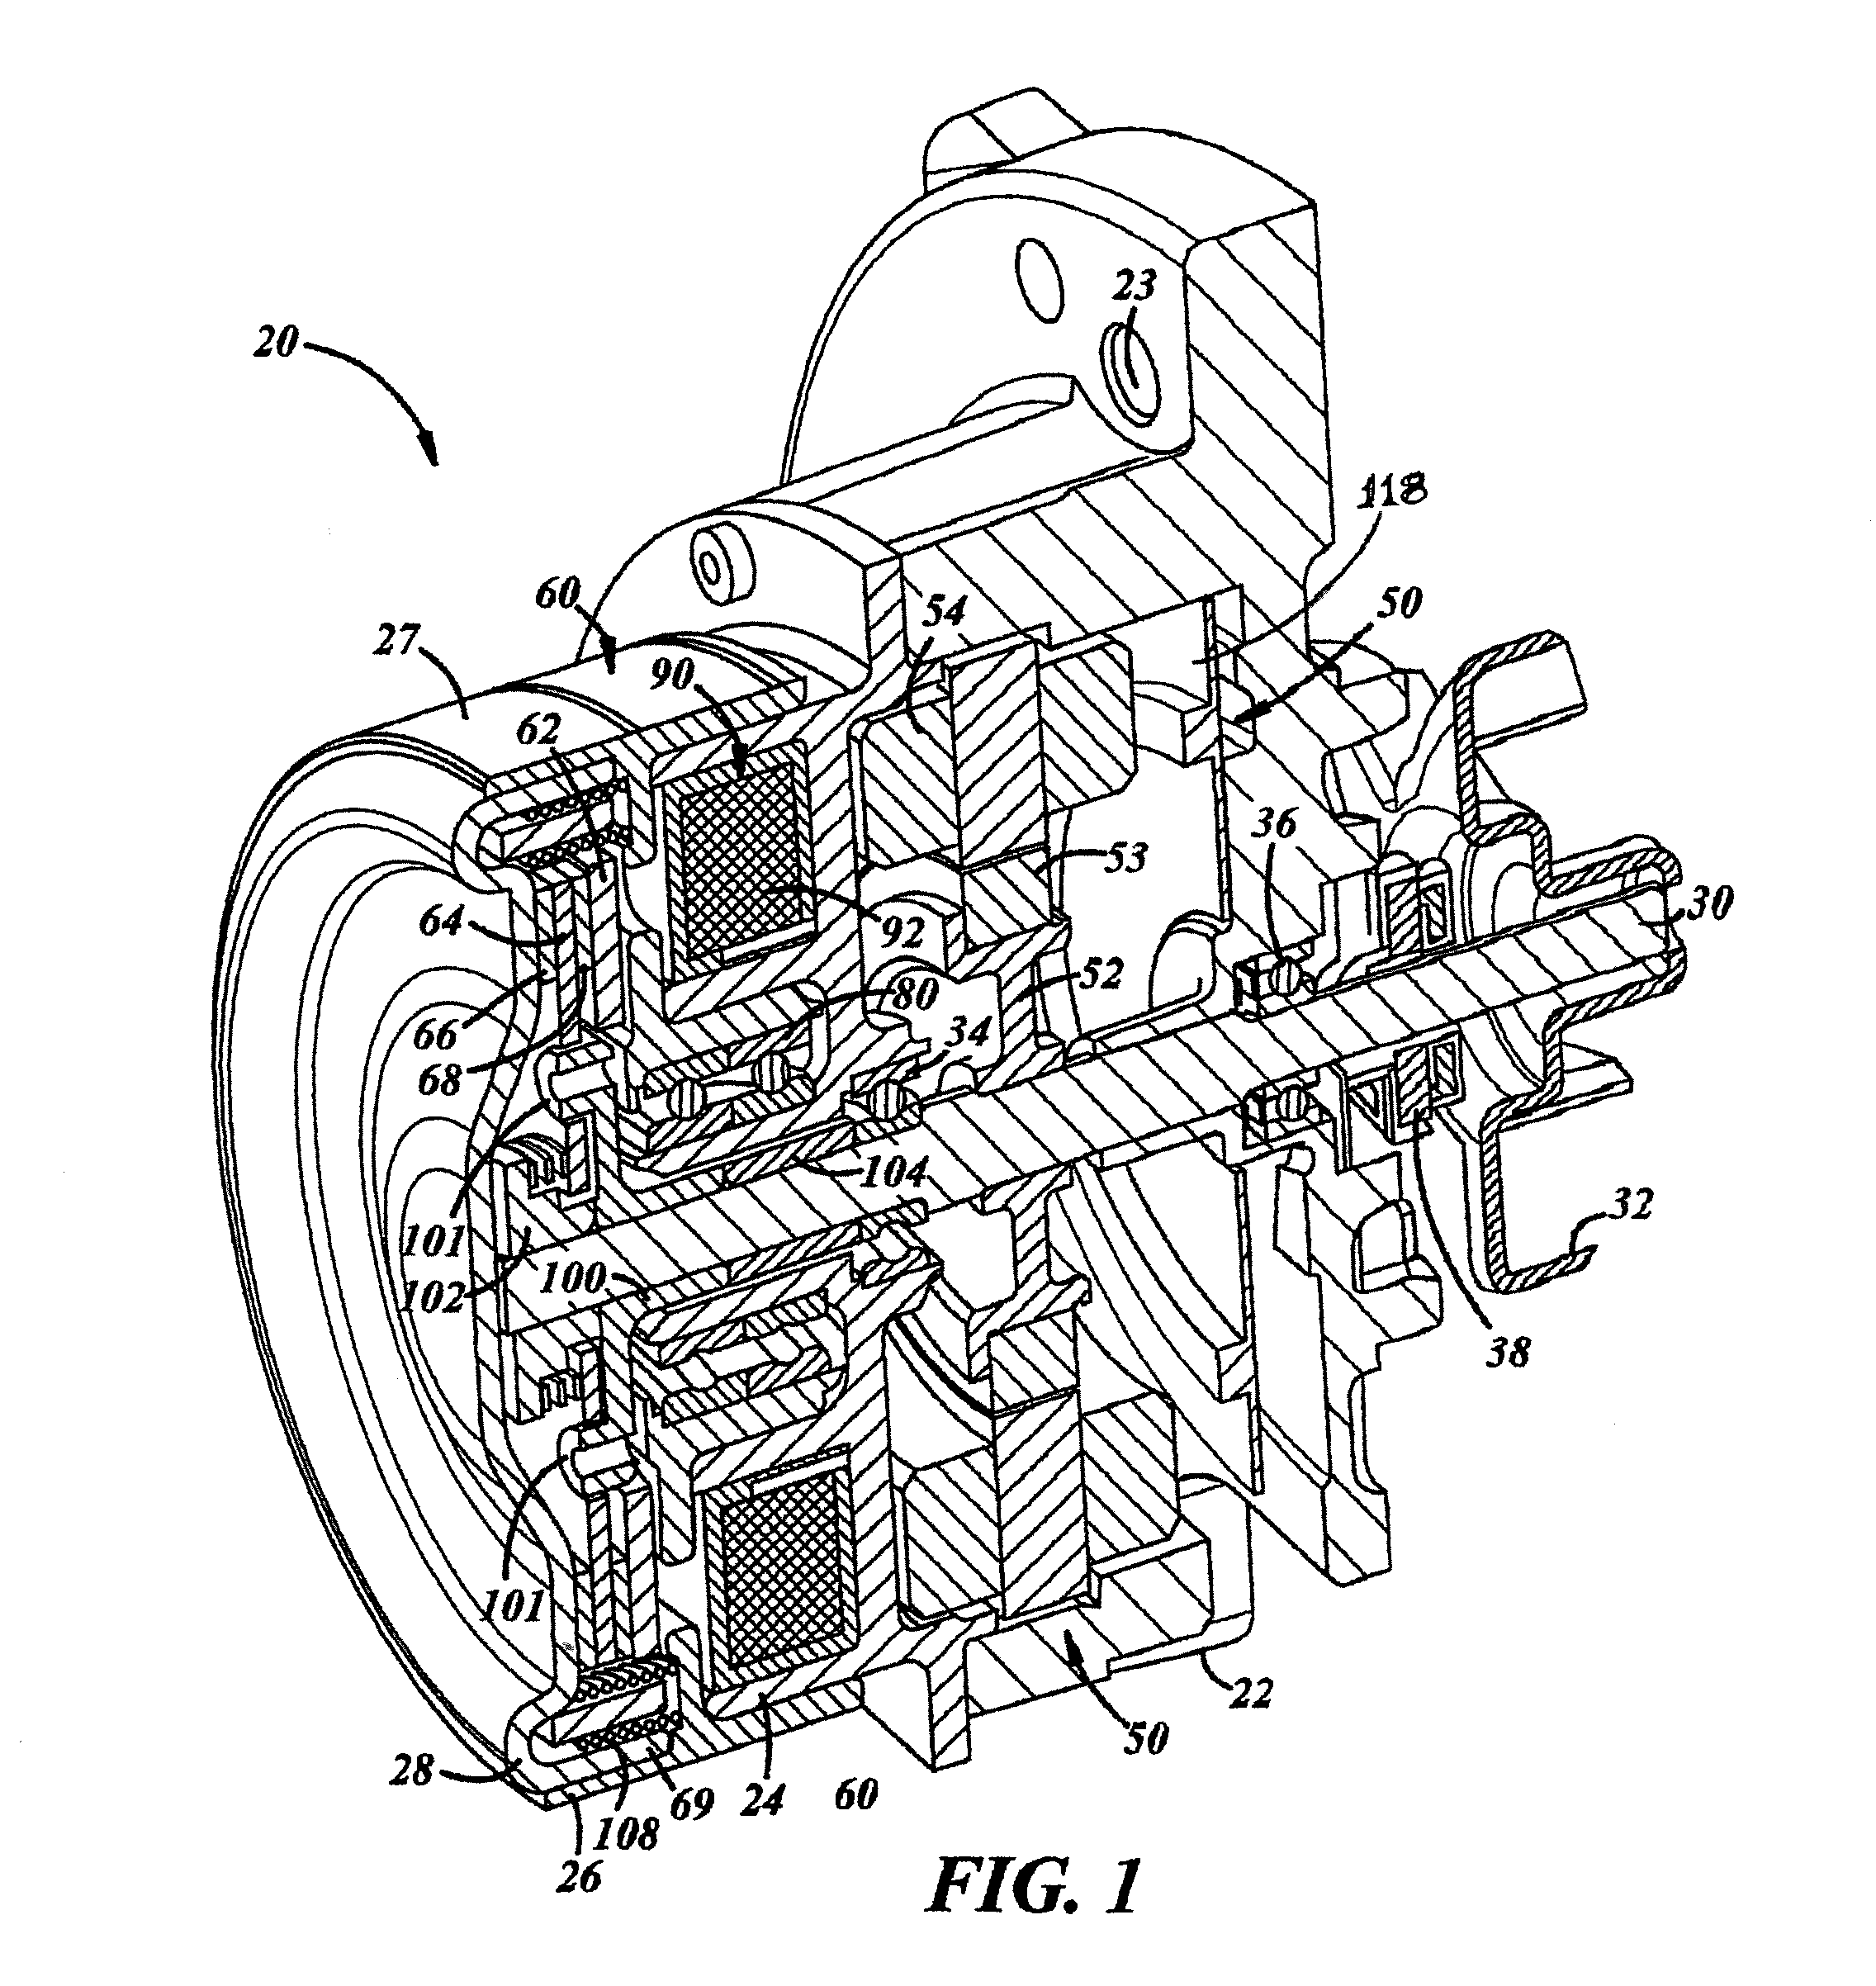 Accessory drive with friction clutch and electric motor